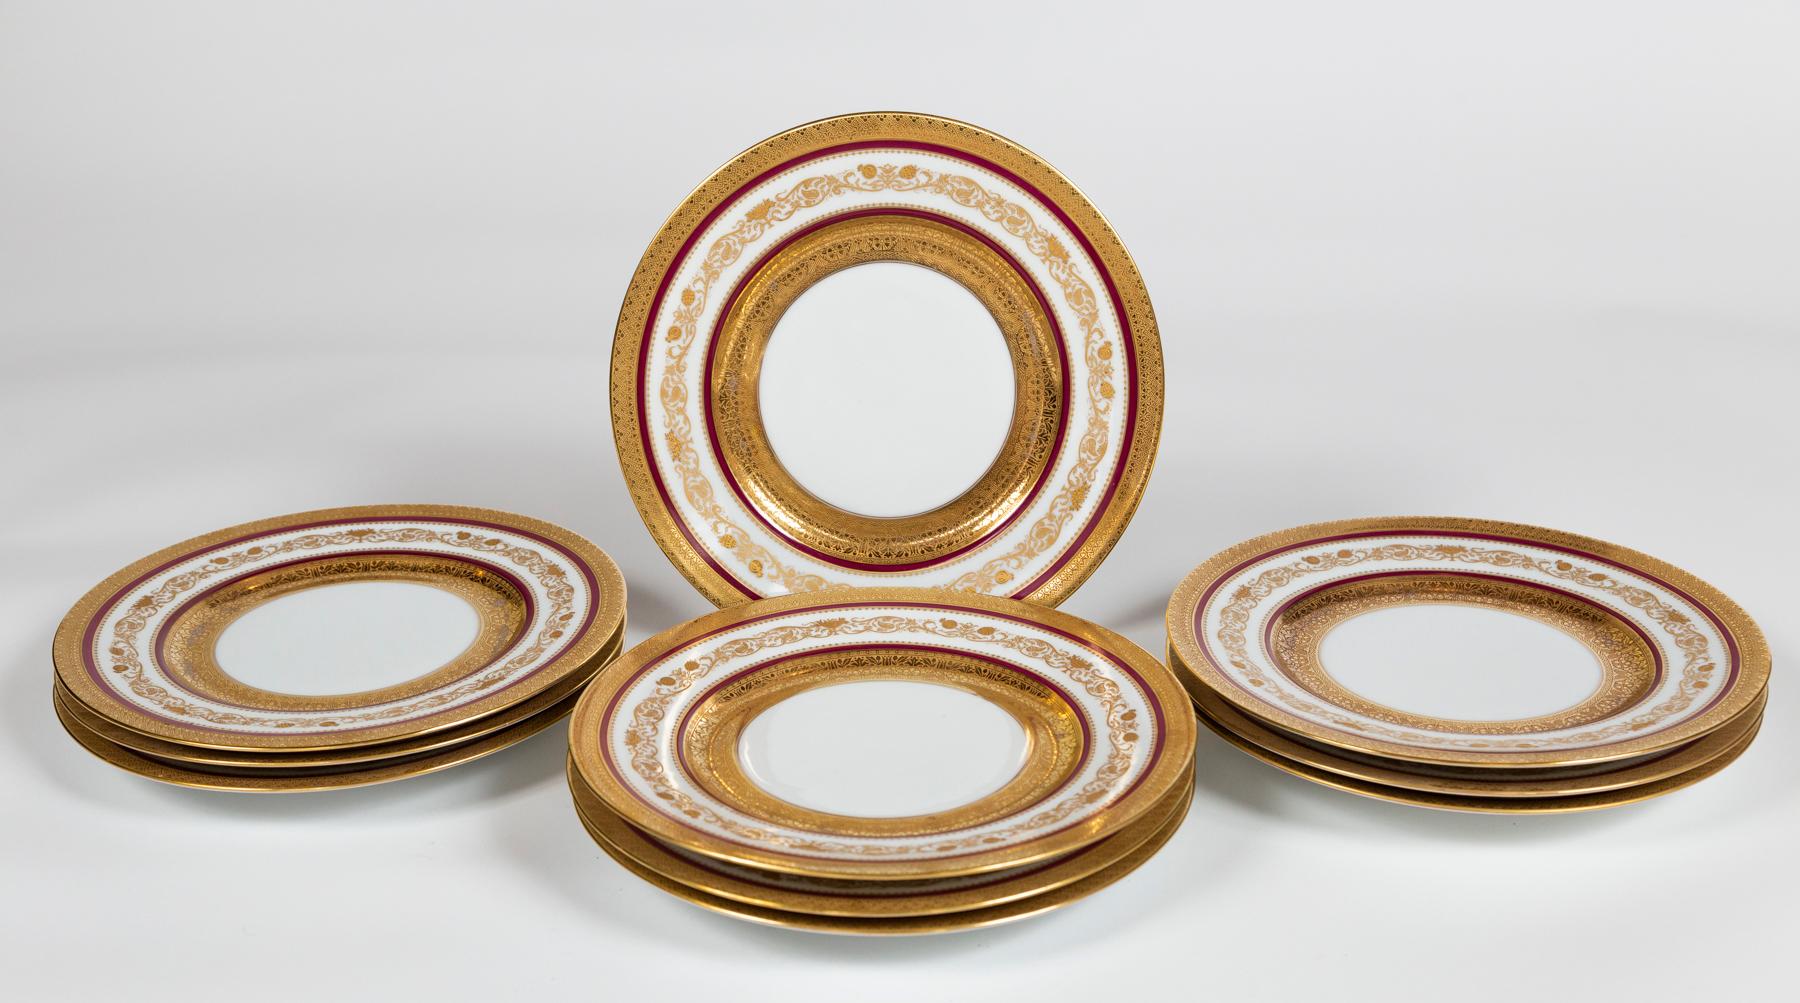 Antique Hutschenreuther Dinner Plates, Early 20th Century, Bavaria In Good Condition For Sale In Chappaqua, NY